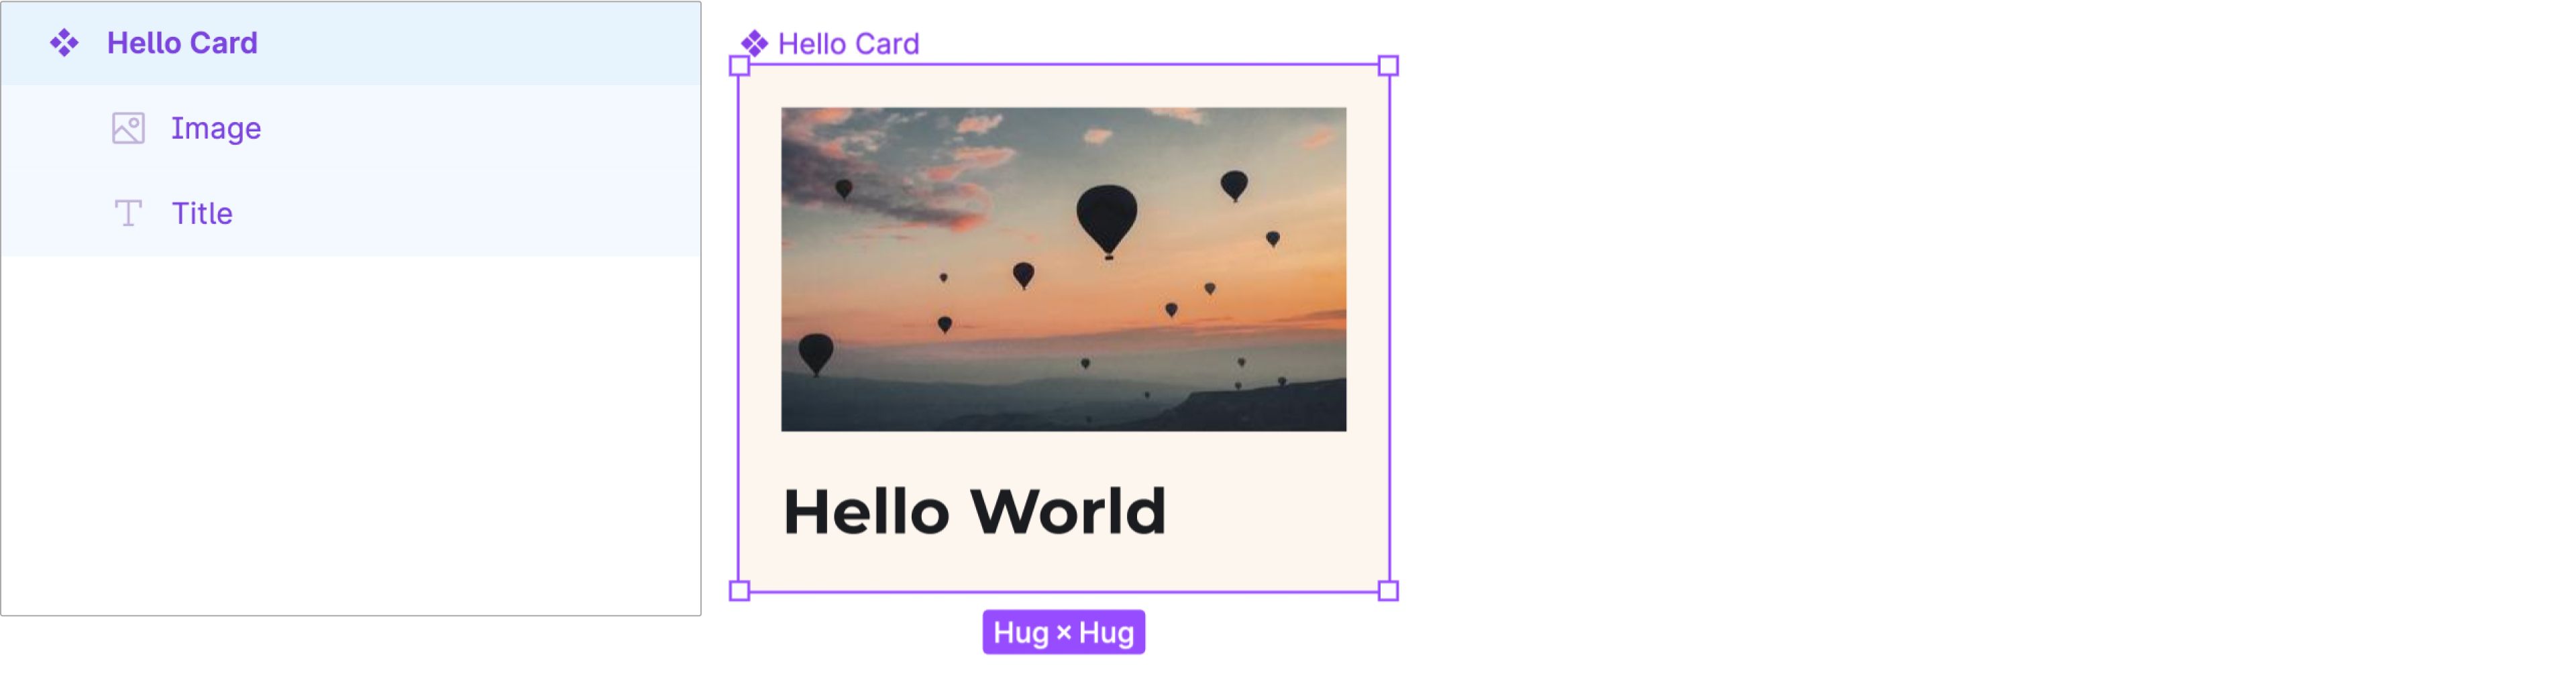 Hello Card component with Image and Title layers